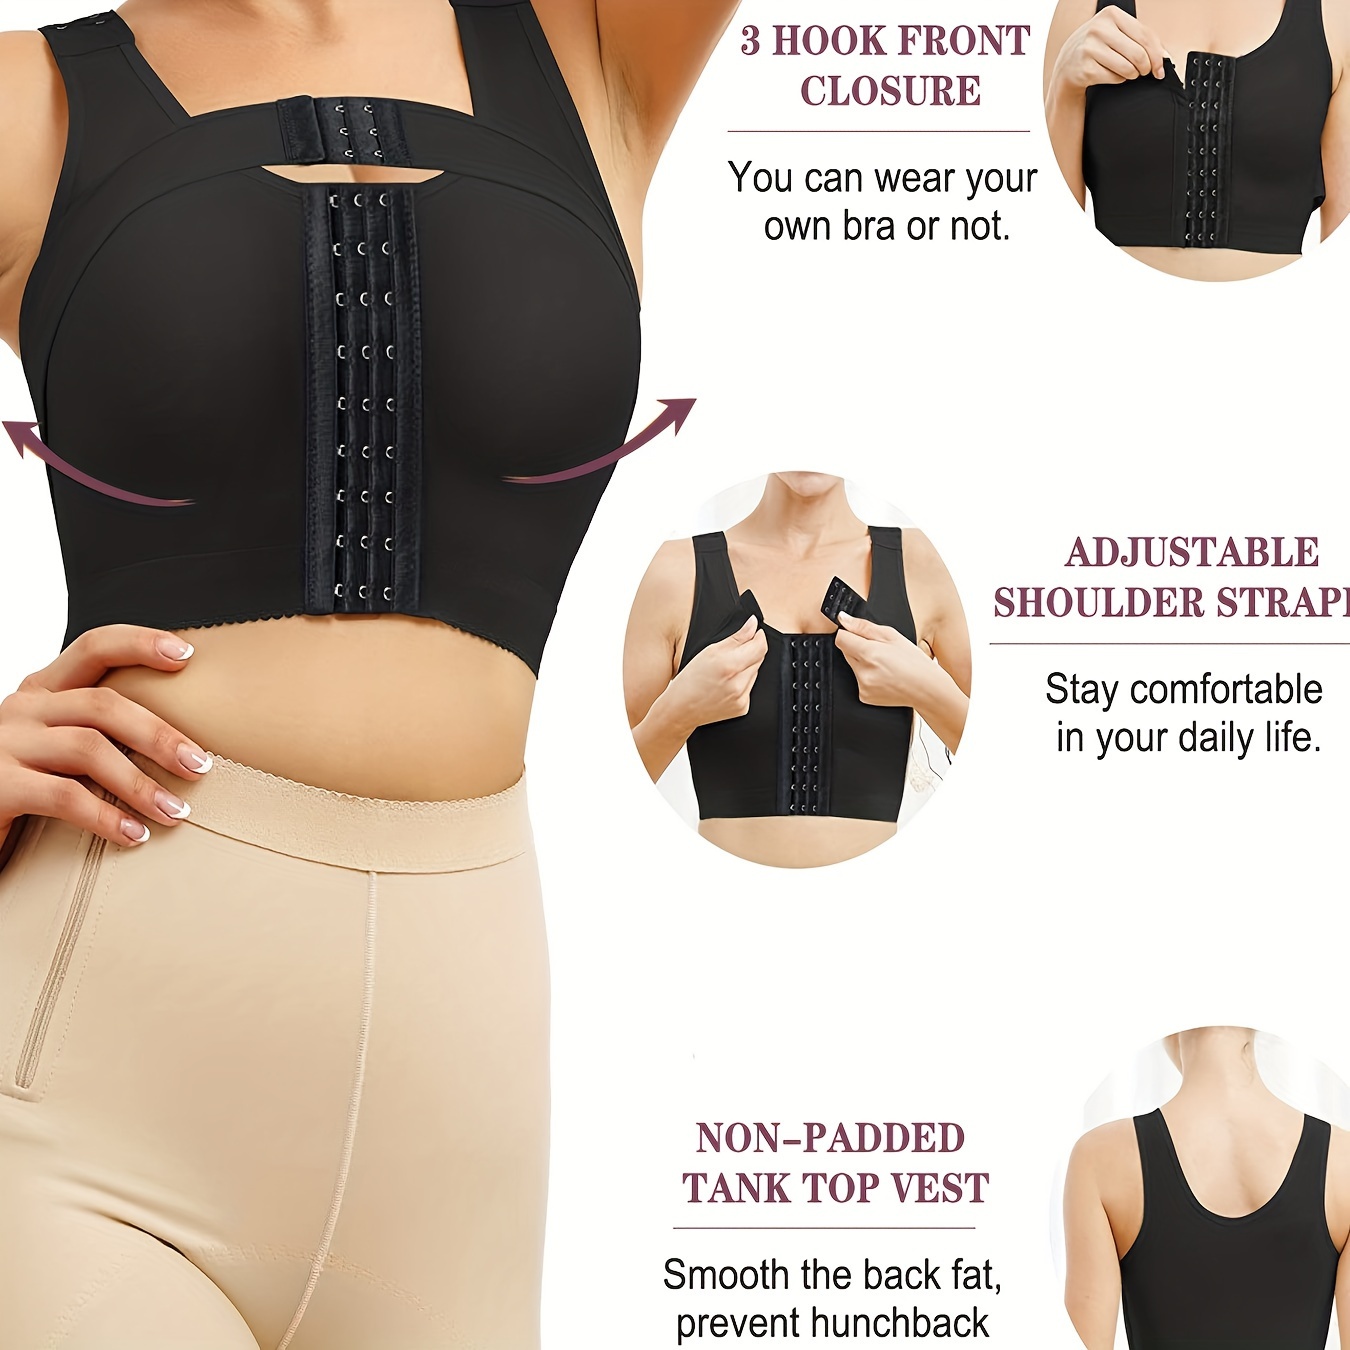 Front Buckle Wire-free Adjustable shaping Bra